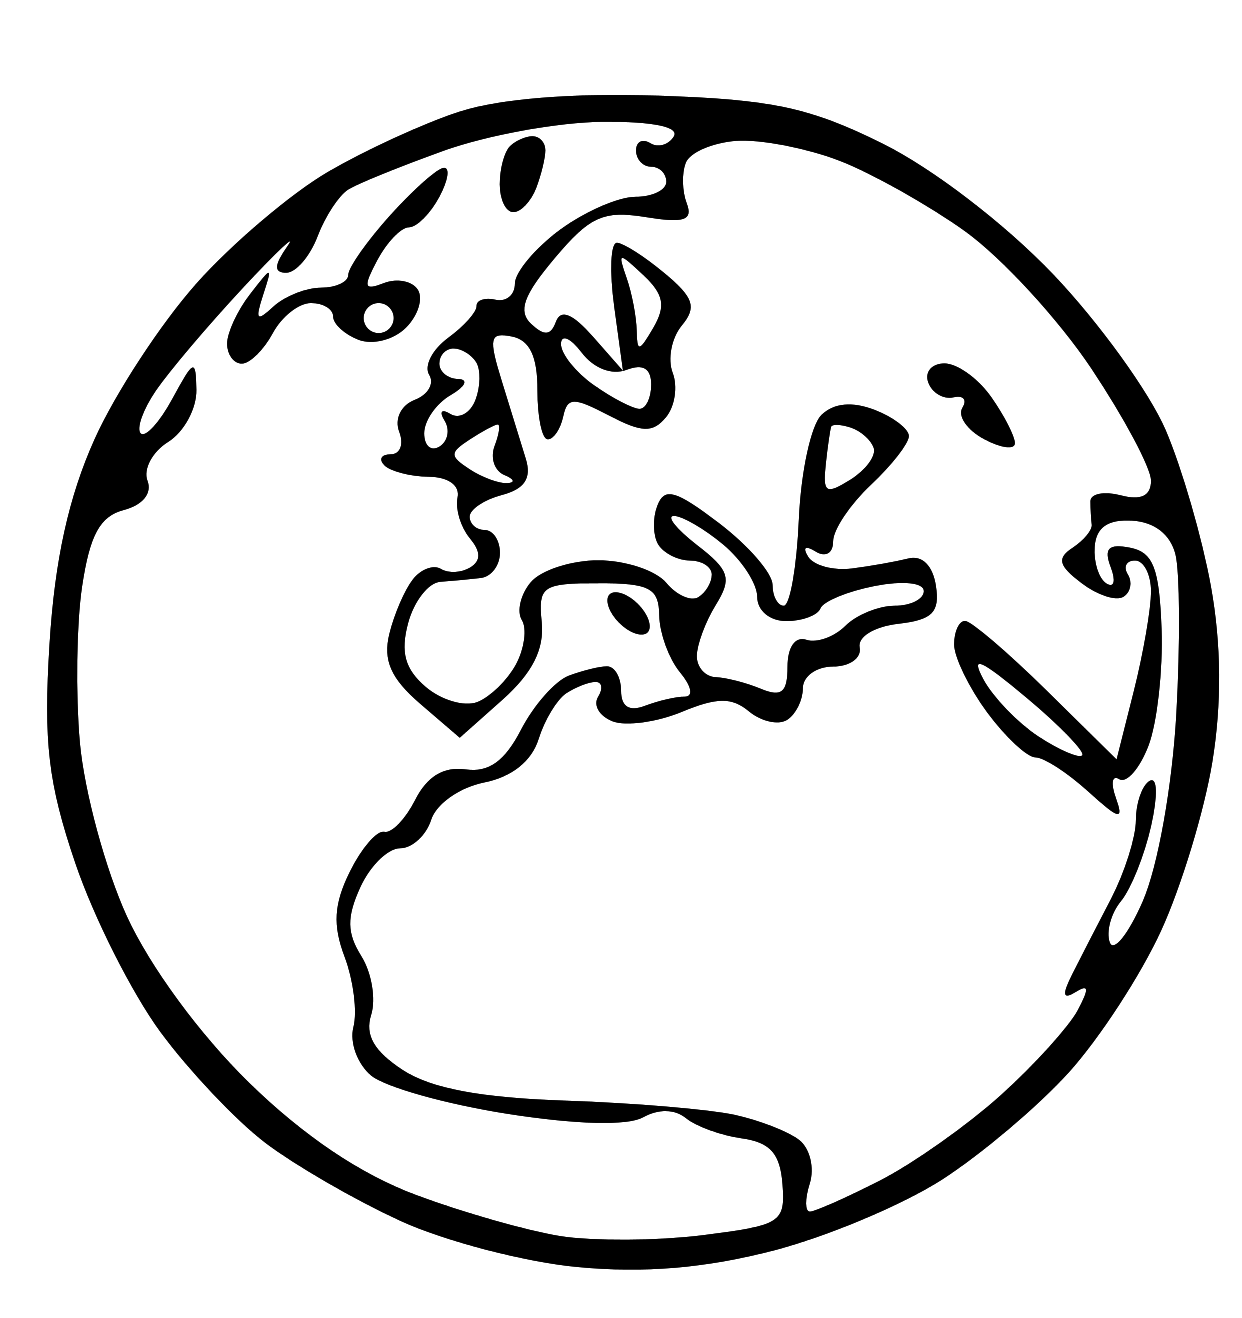 Clip Art Of The Earth